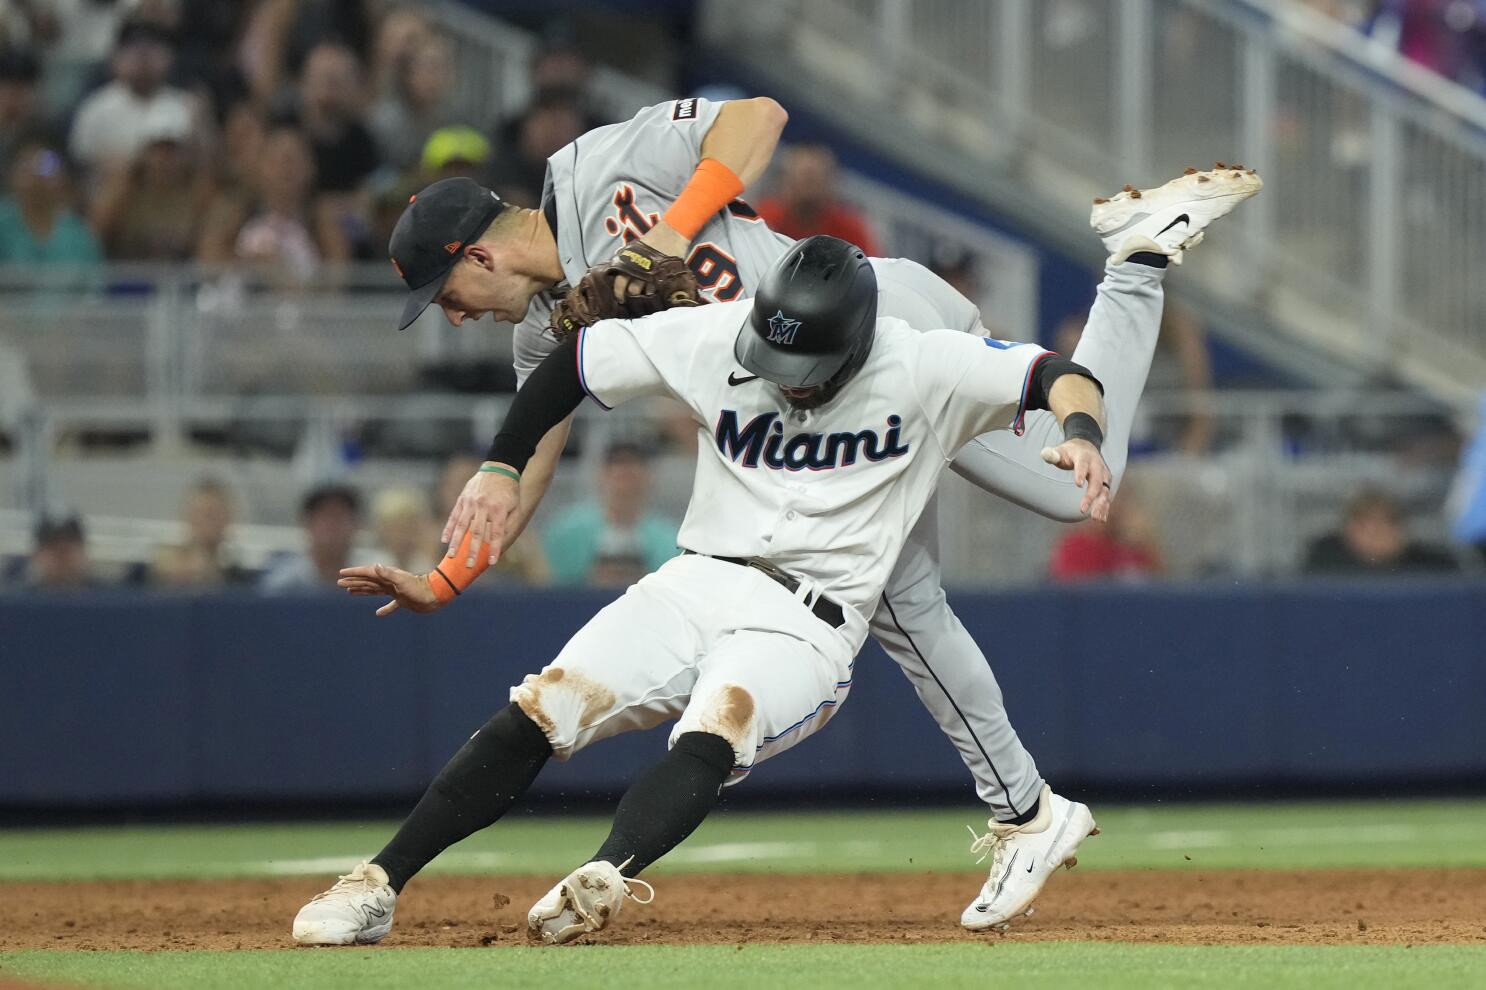 Cooper and Segura homer, López and Robertson play key roles as Marlins beat  Tigers 8-6 - The San Diego Union-Tribune